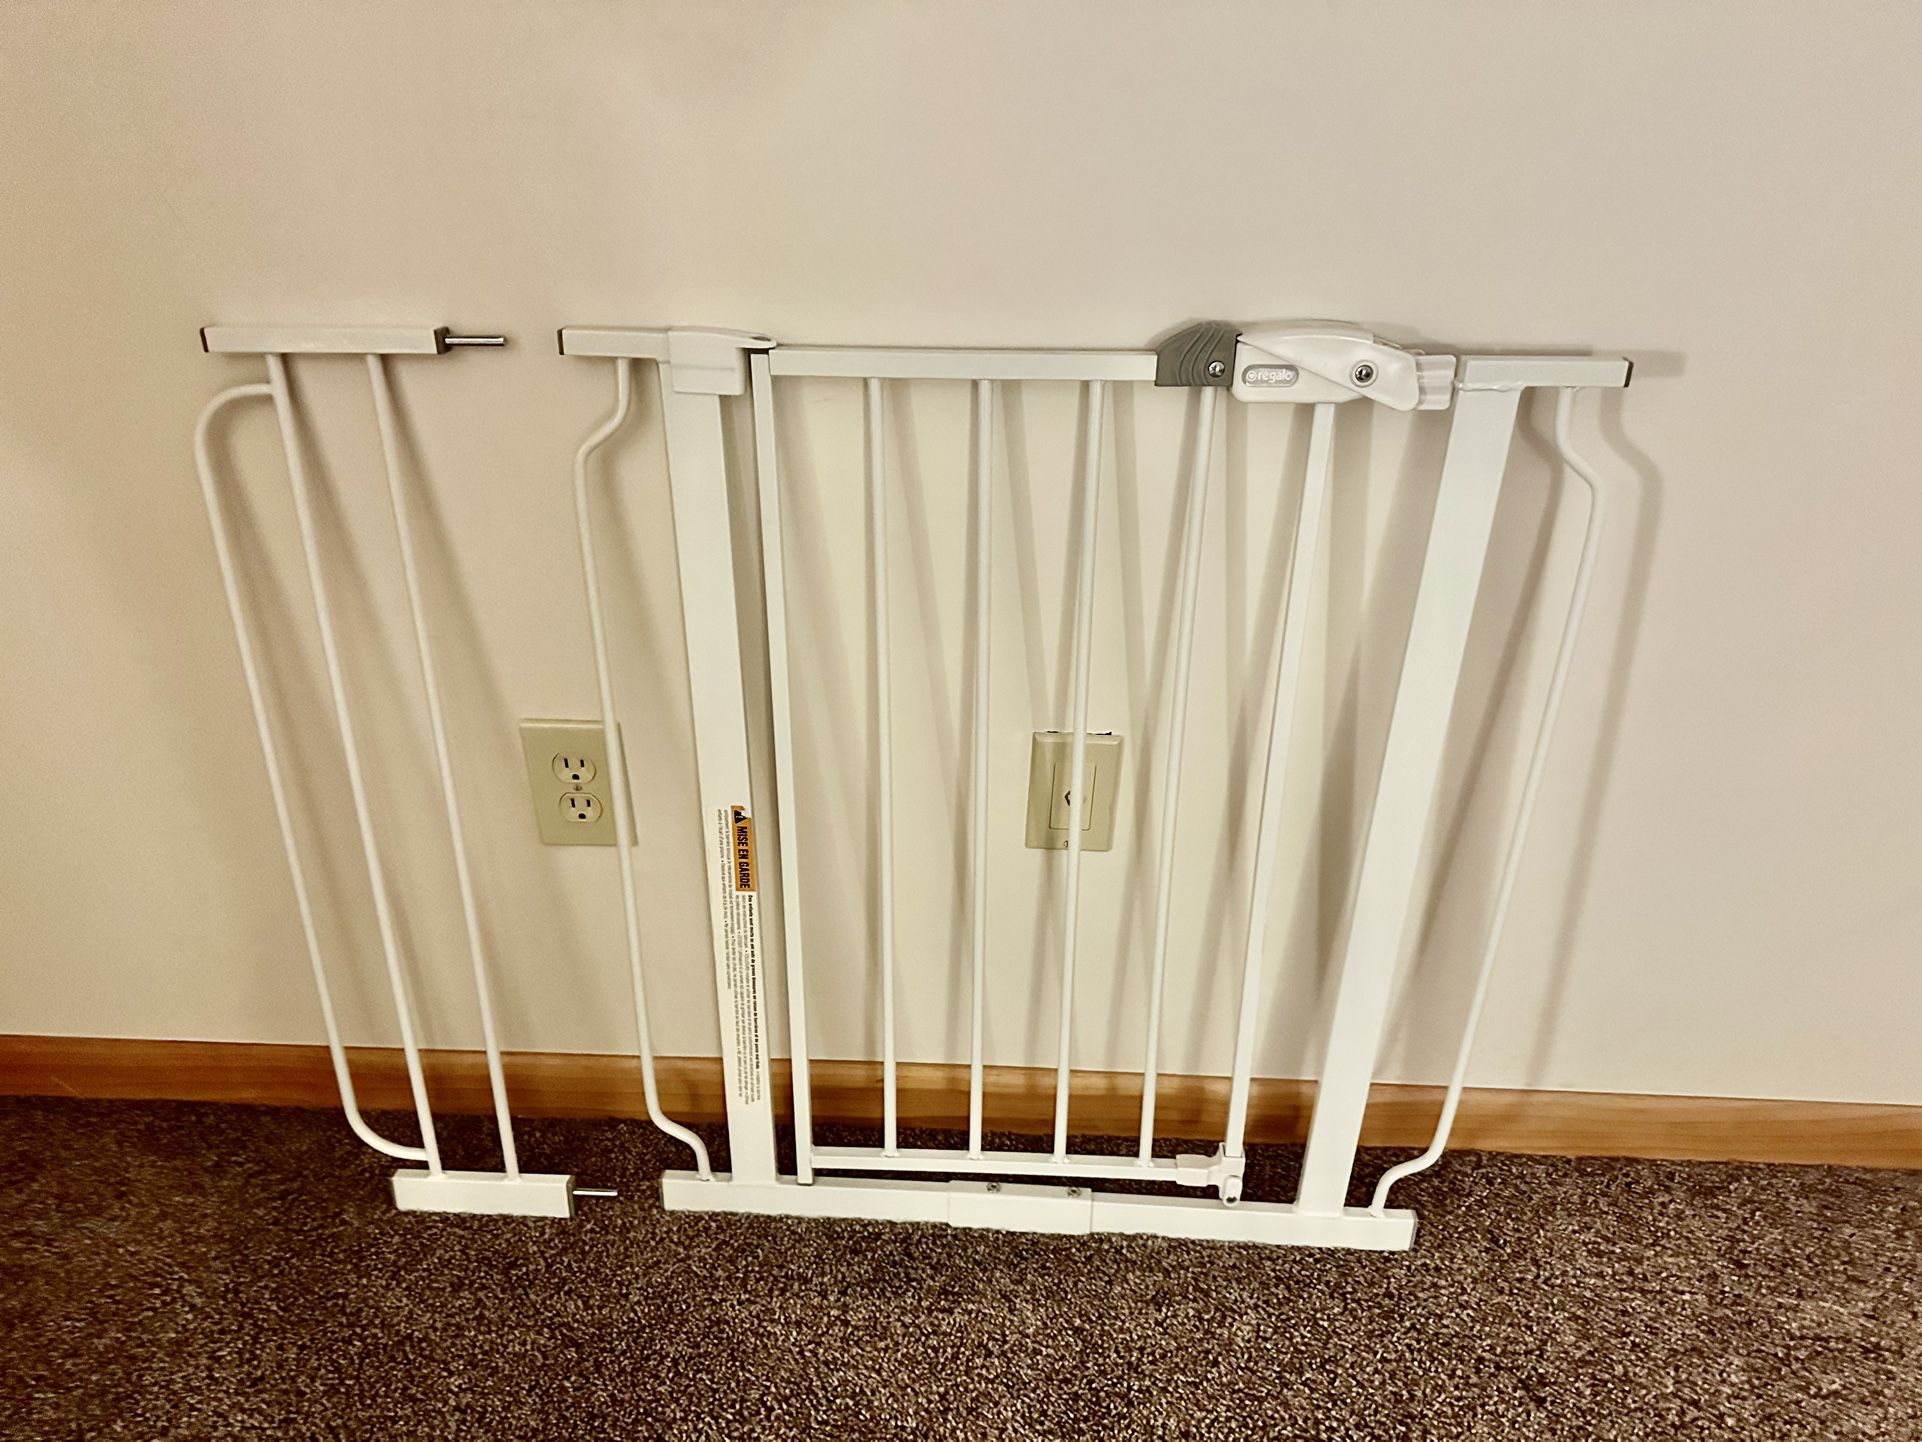 Baby Gate - Excellent Condition (I have 2 of them) Price Is For Each One…OBO